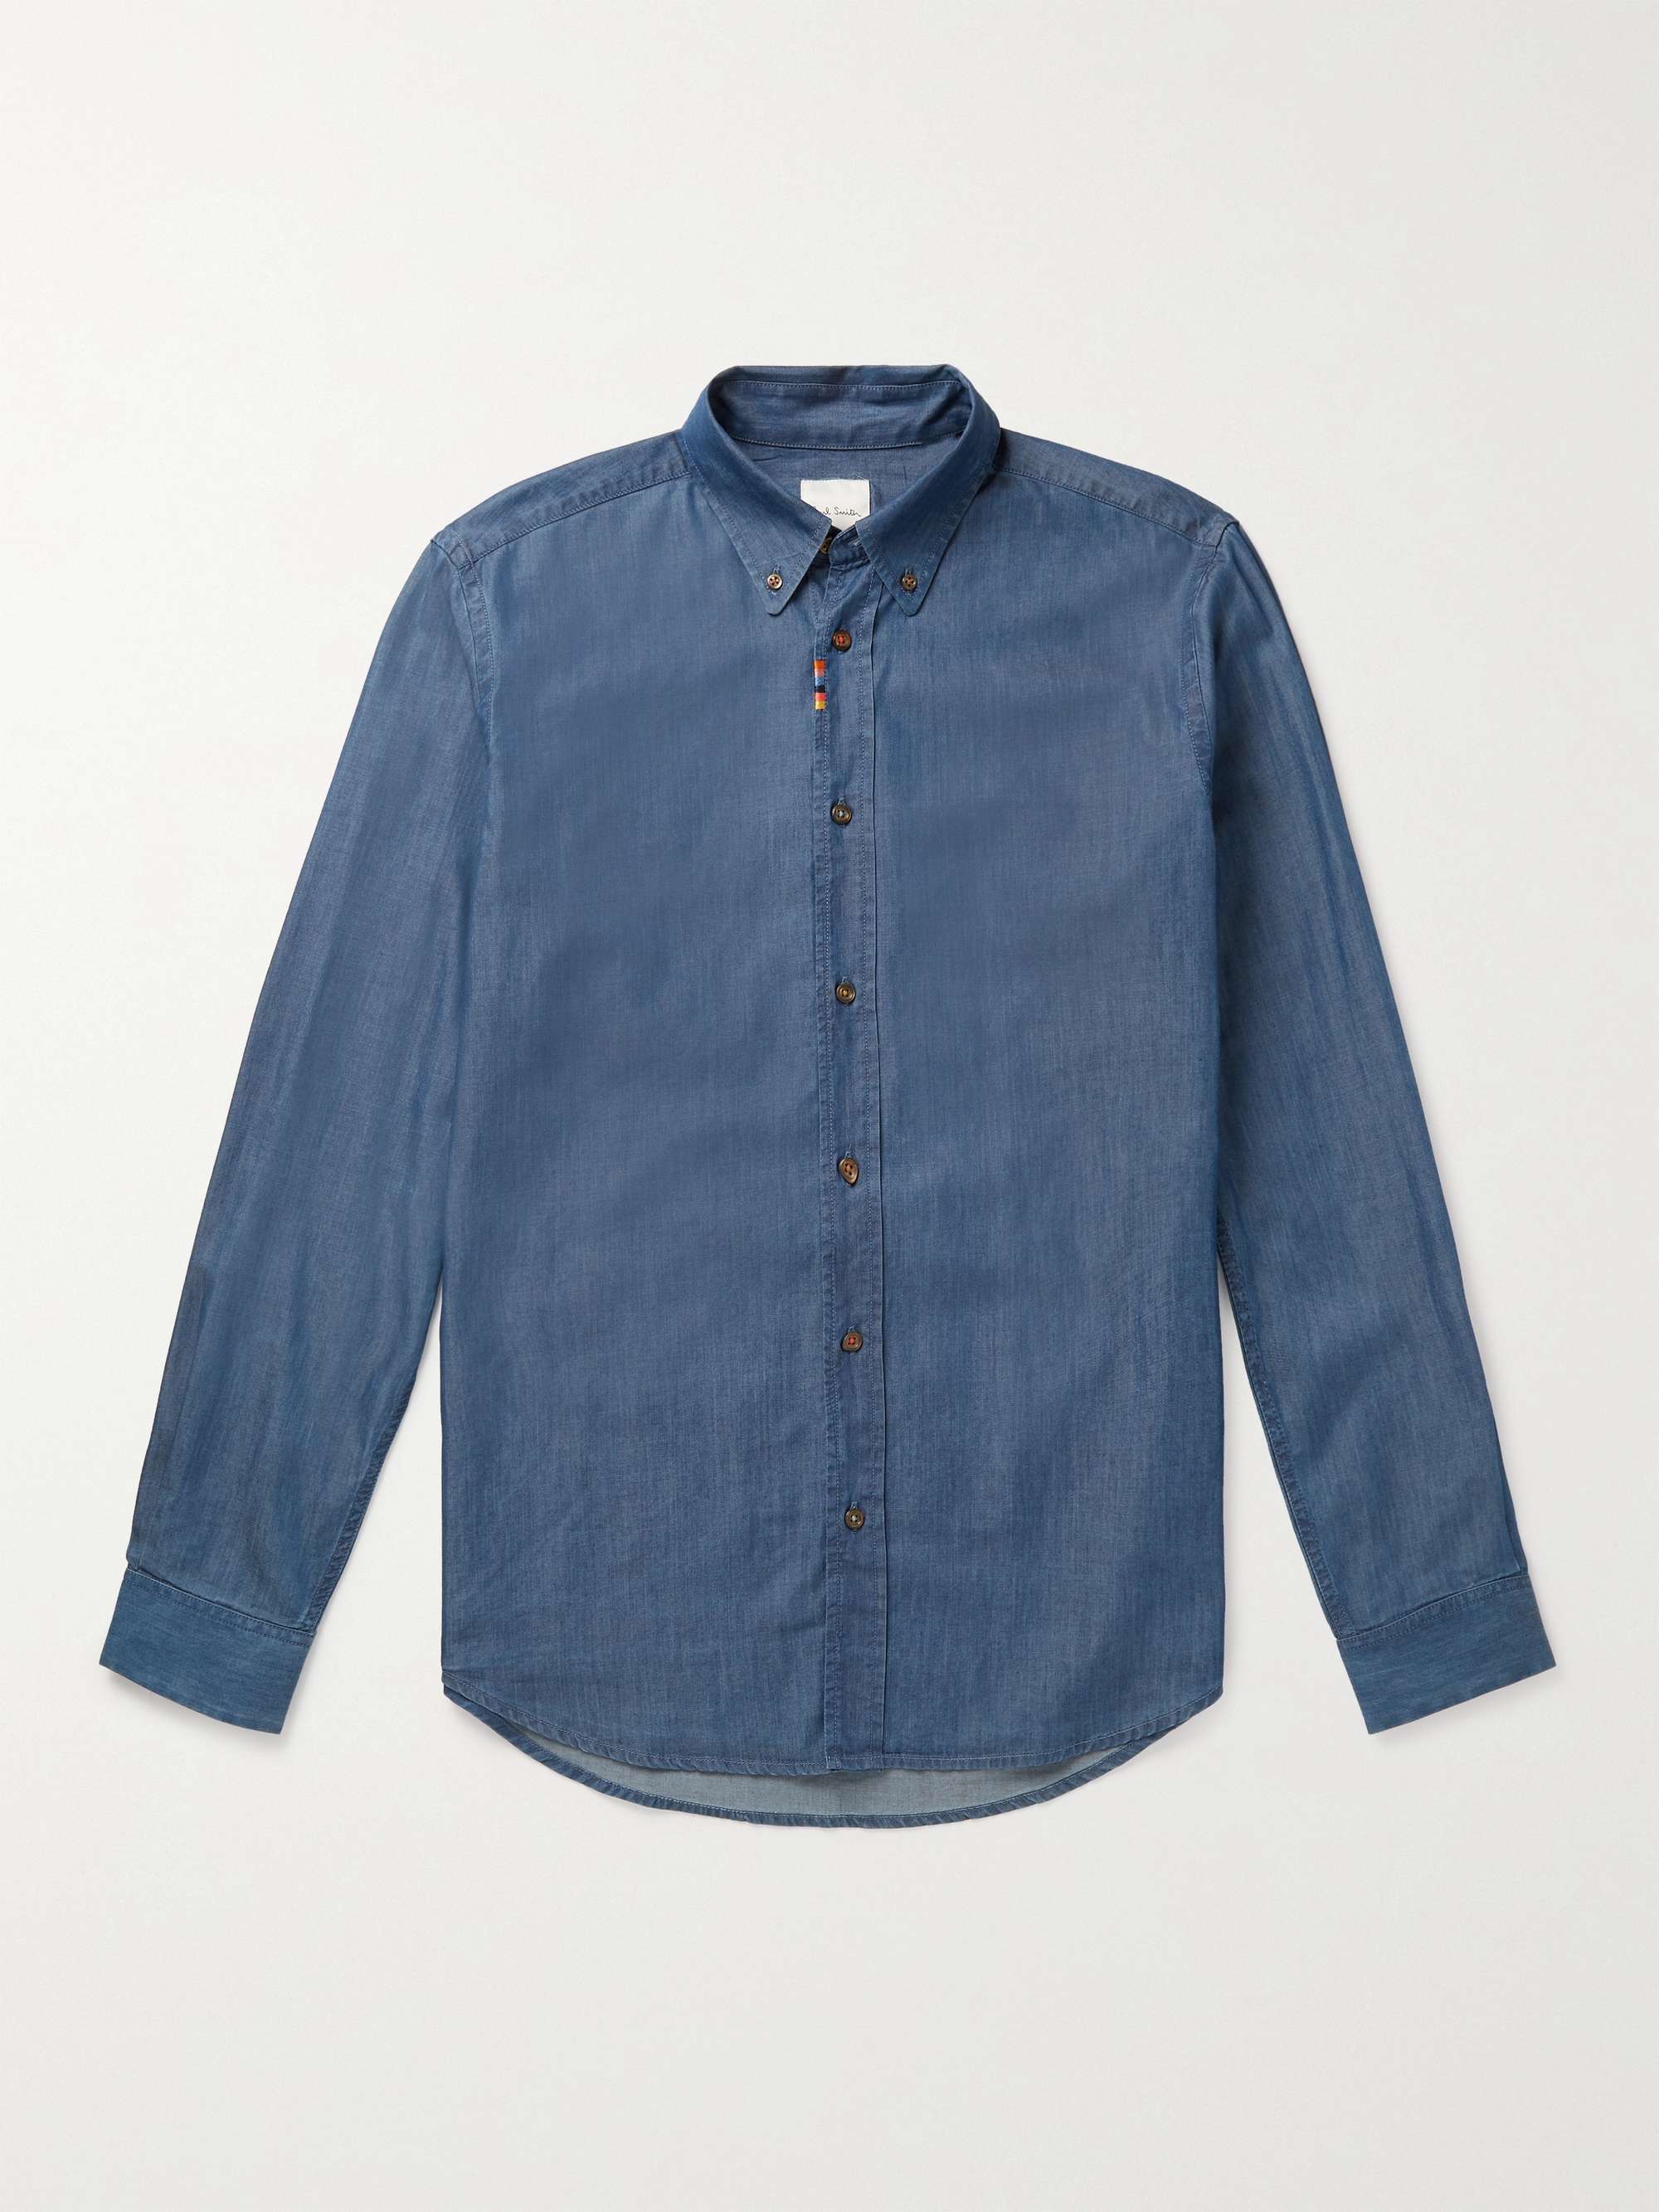 PAUL SMITH Button-Down Collar Cotton and TENCEL-Blend Chambray Shirt